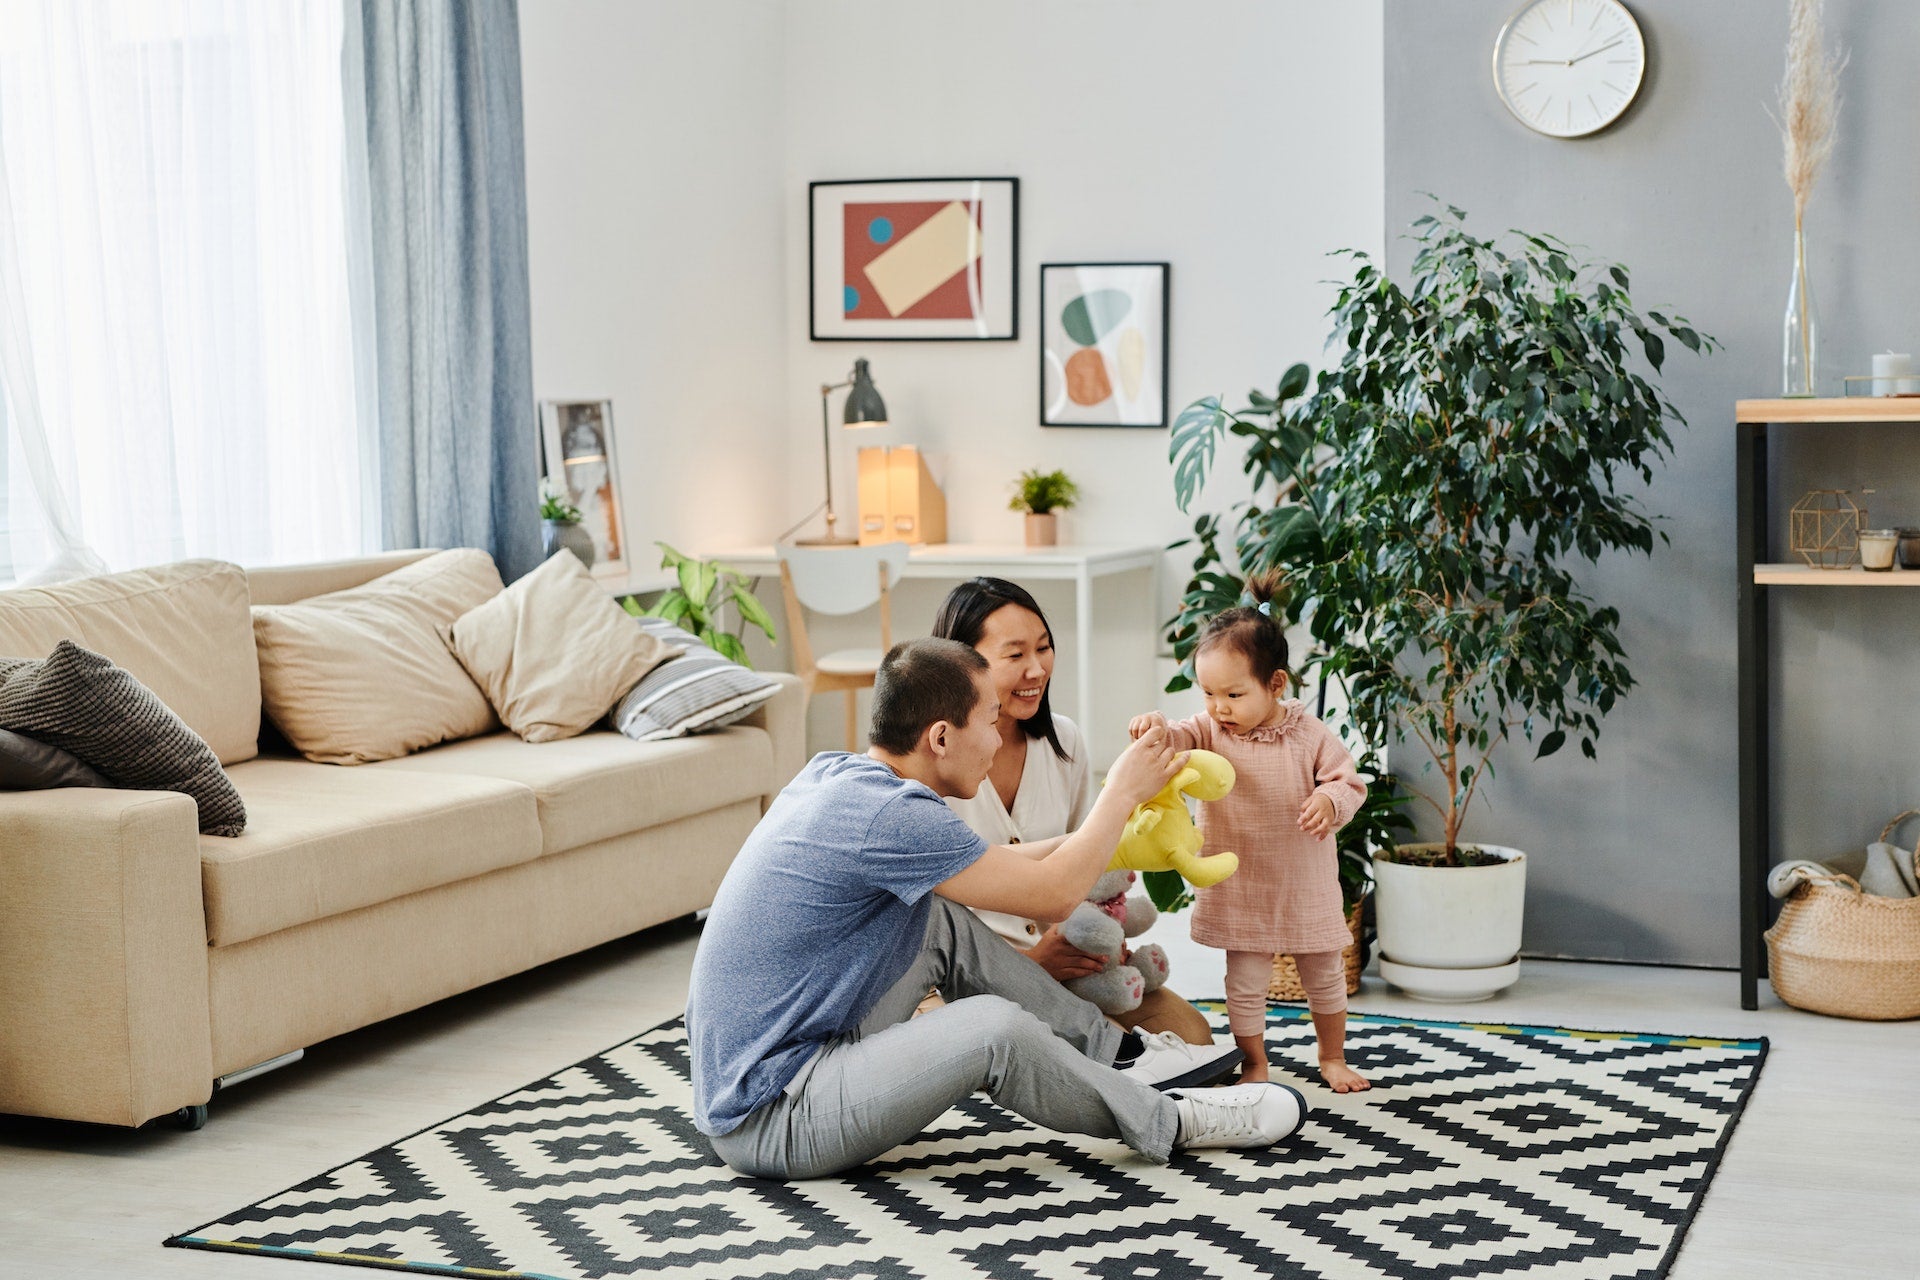 A mother and father play with their toddler on the living room floor